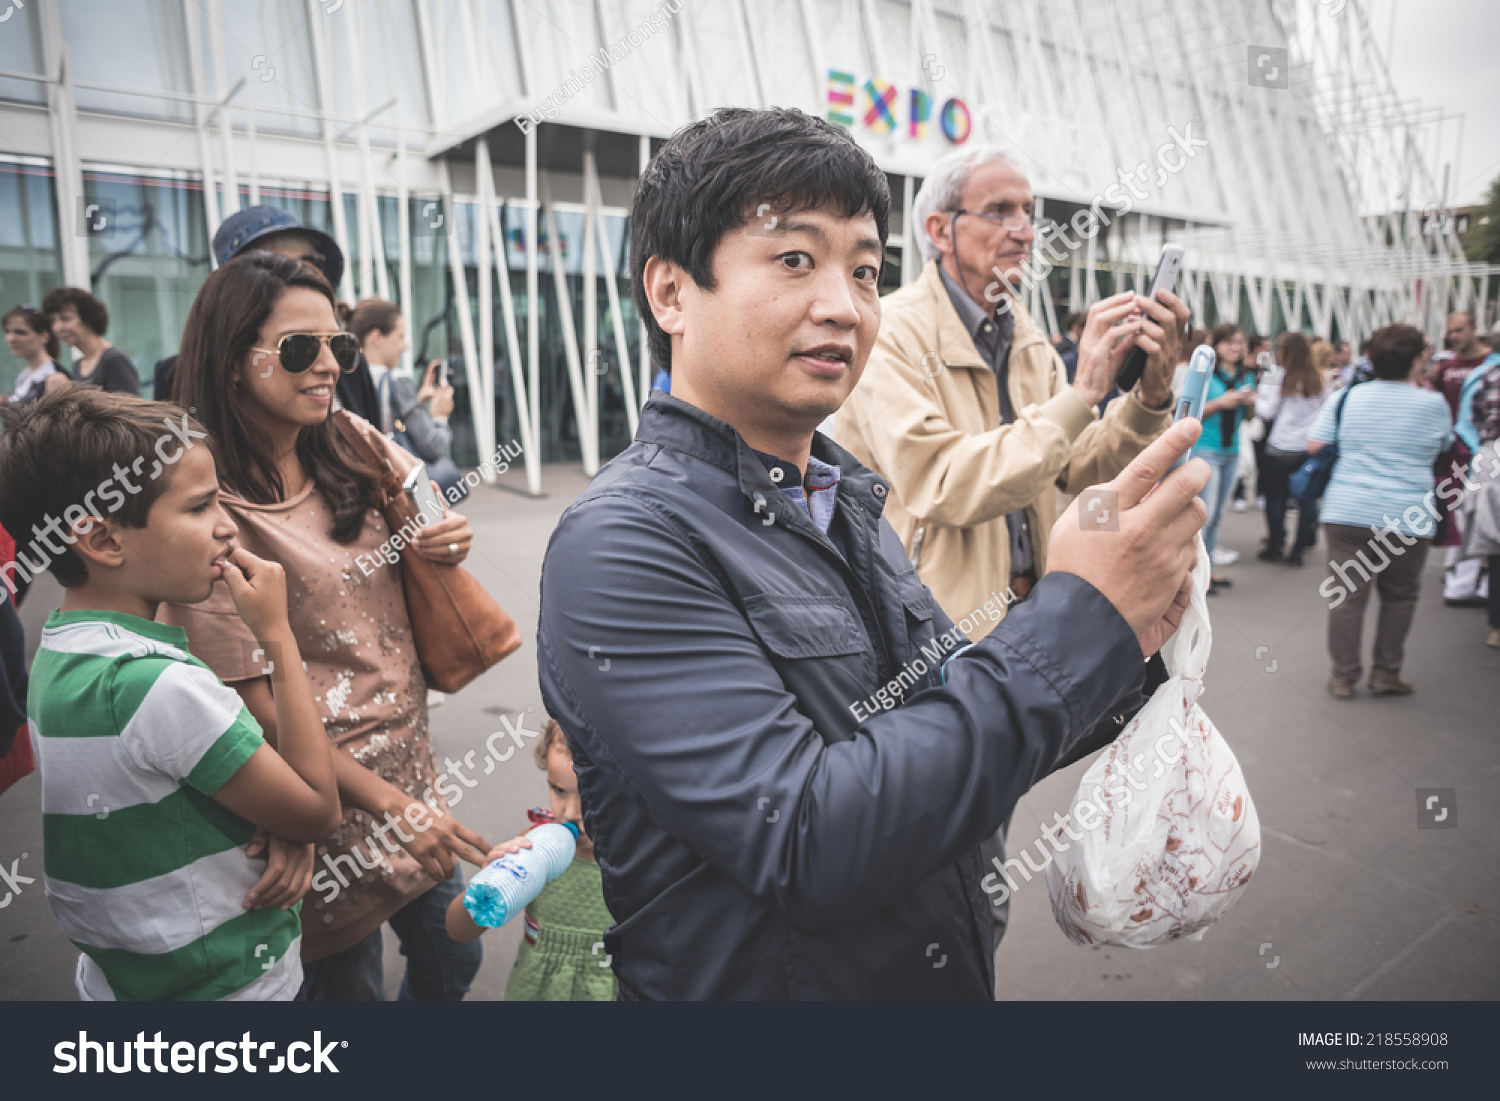 MILAN, ITALY - SEPTEMBER 20: People during Milan Fashion week in Milan, Italy on September, 20 2014. Eccentric and fashionable people in the city during fashion week wait for models and famous people #218558908